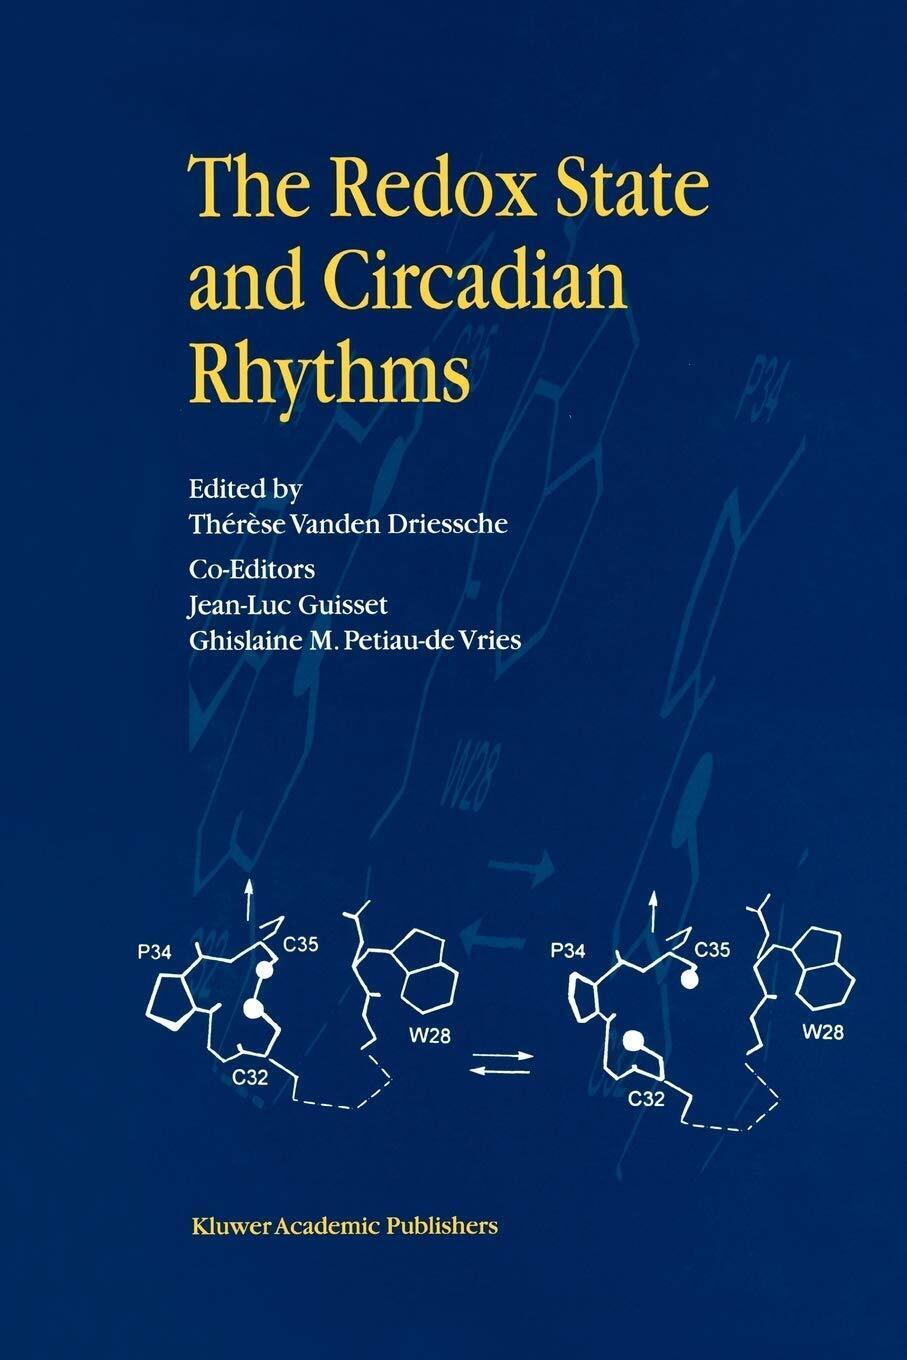 The Redox State and Circadian Rhythms - Therese Vanden Driessche - 2010 libro usato